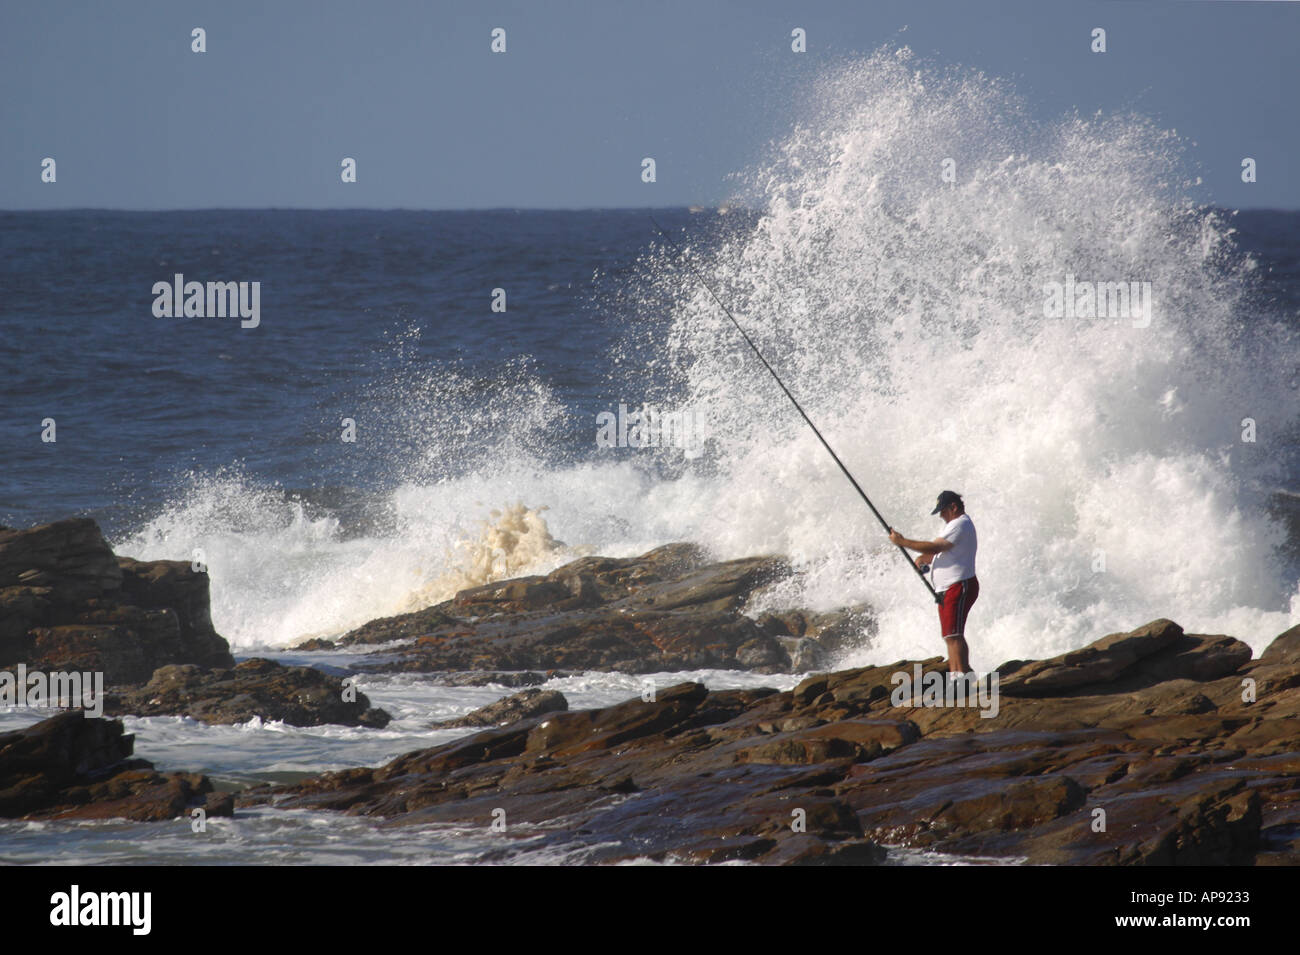 Fisherman surf fishing off rocky shore with waves breaking Stock Photo